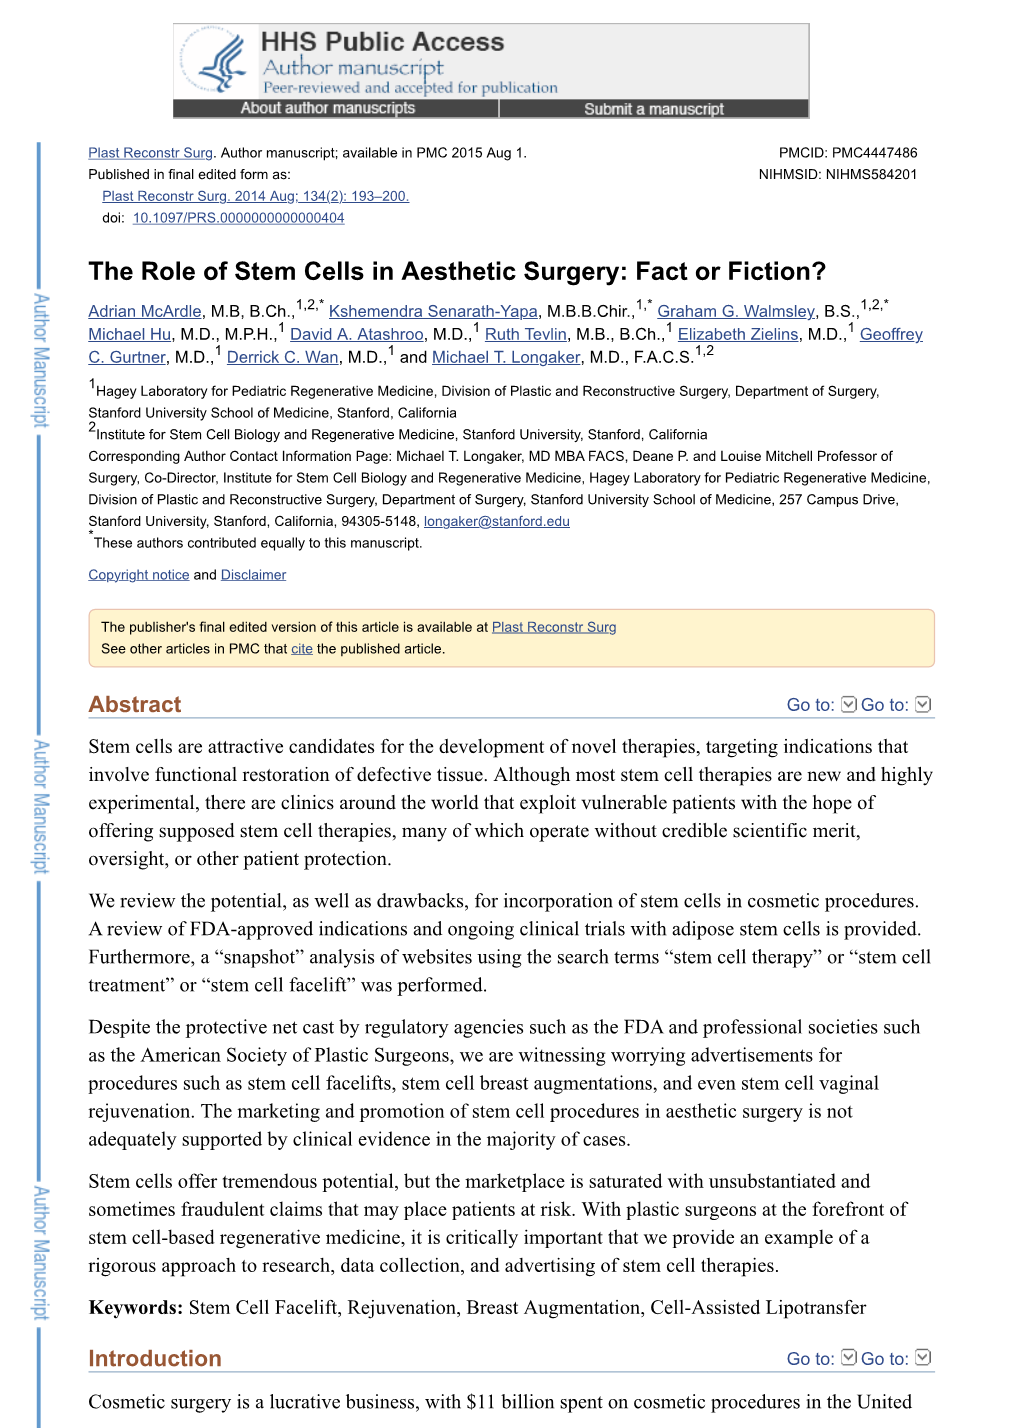 The Role of Stem Cells in Aesthetic Surgery: Fact Or Fiction?